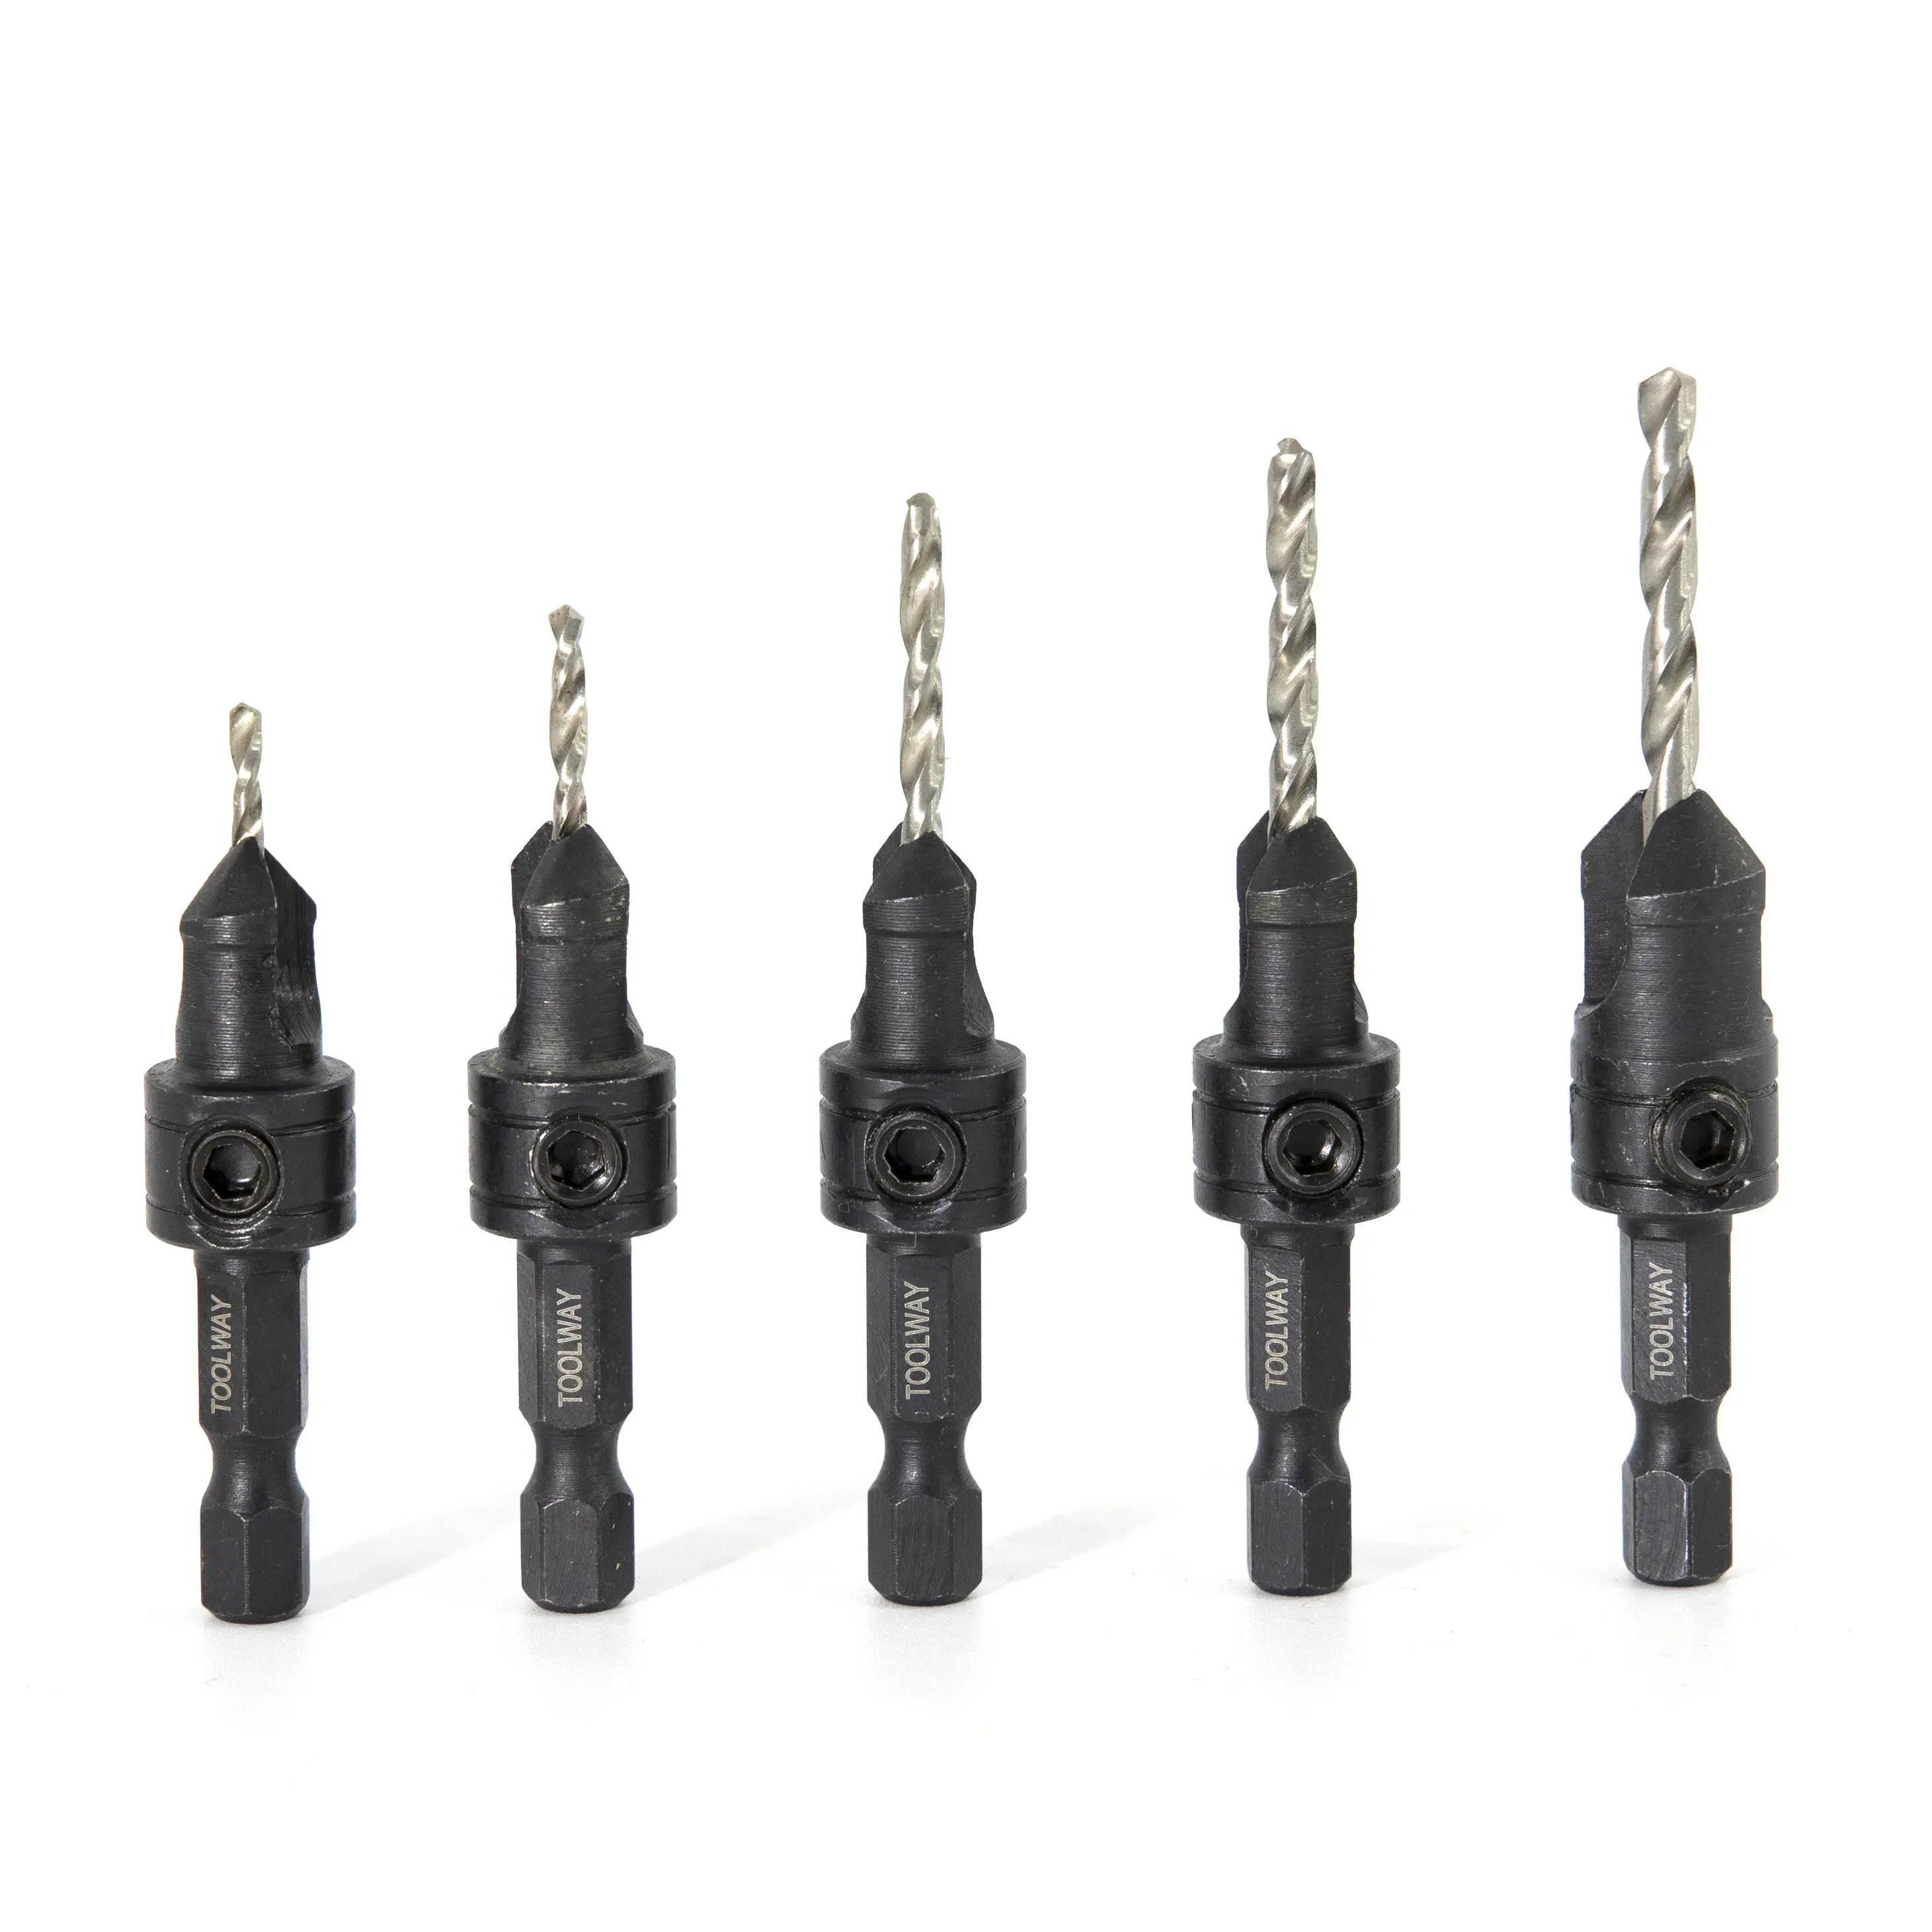 TOOLWAY 5PCS Countersink Drill Bit Set With Quick Change Hex Shank Wood Countersink Set